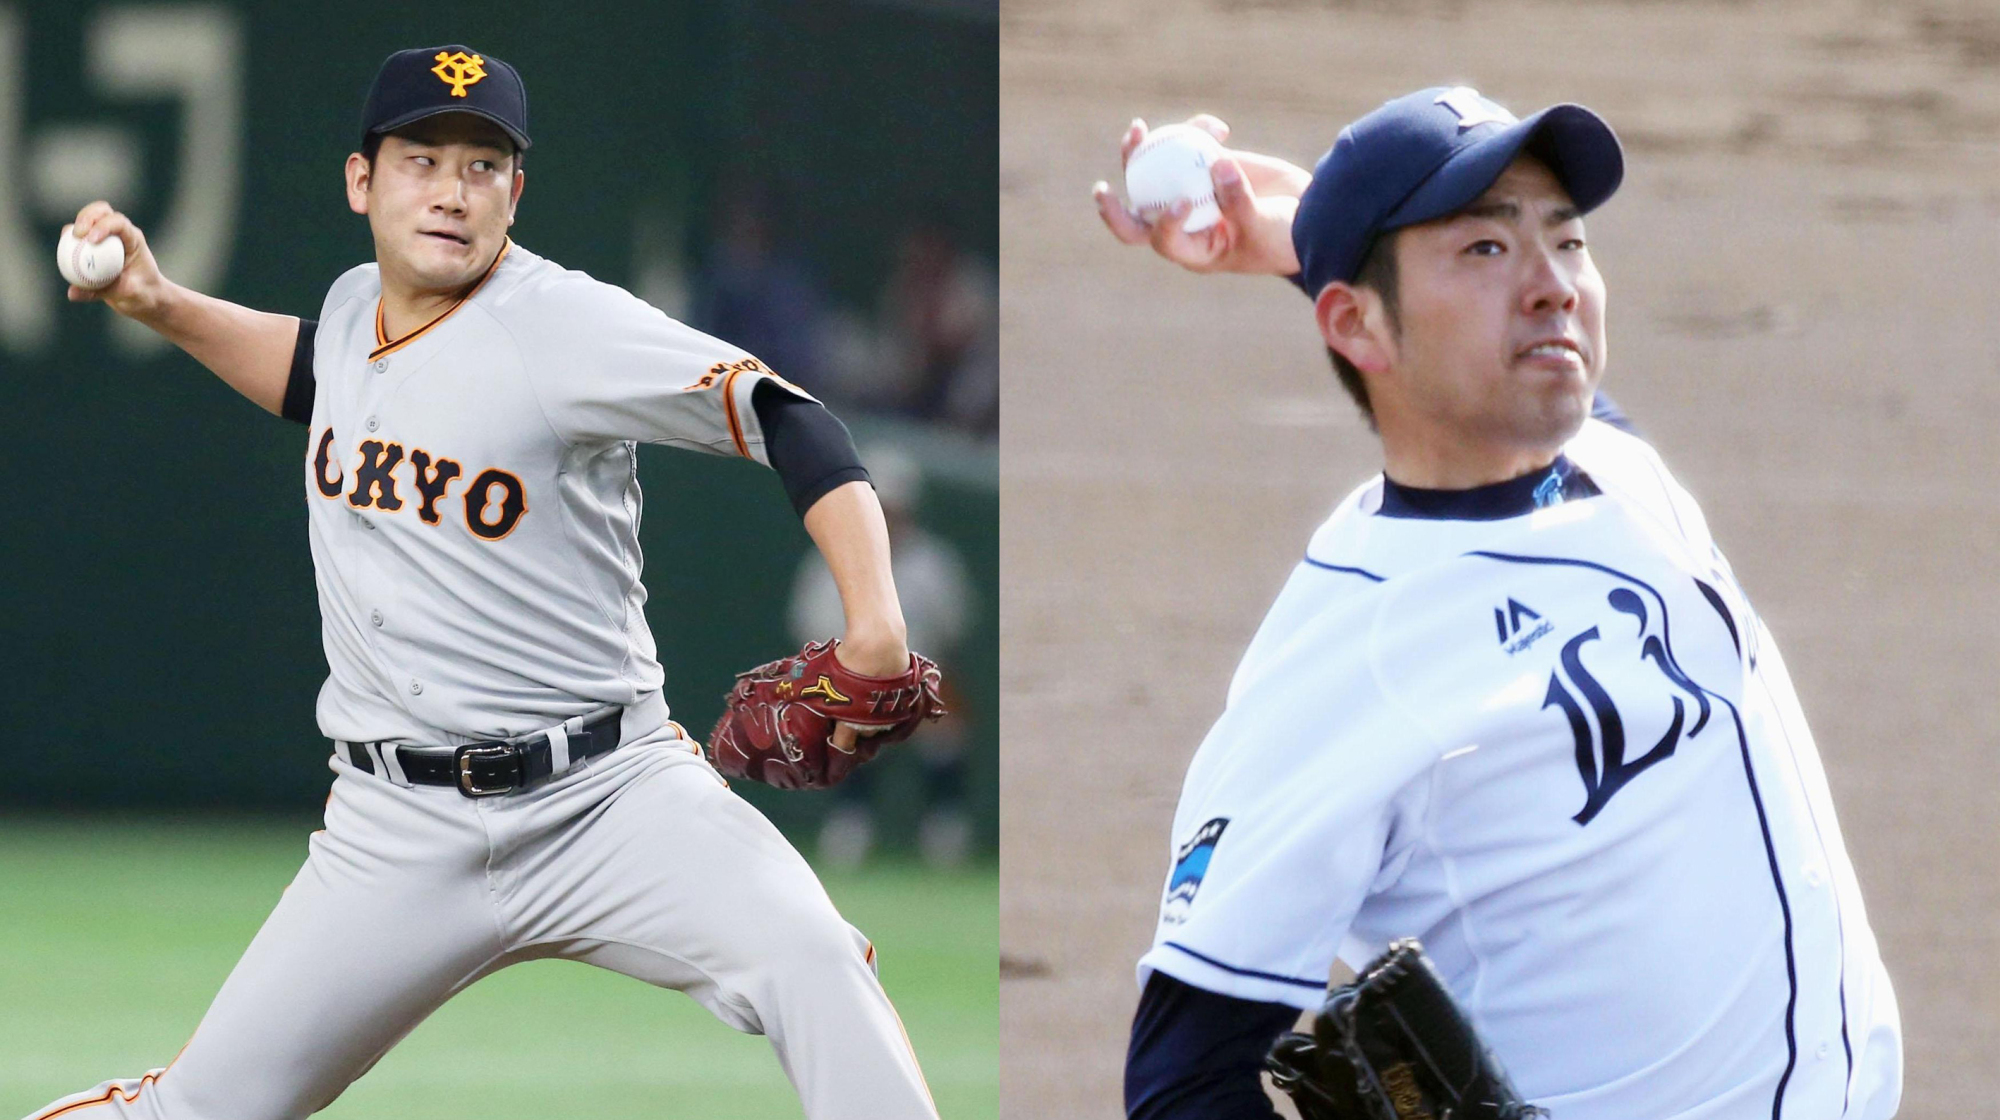 Pitchers Tomoyuki Sugano of the Yomiuri Giants (left) and Yusei Kikuchi of the Seibu Lions faced off Friday night as several MLB scouts looked on at Tokyo Dome. | KYODO